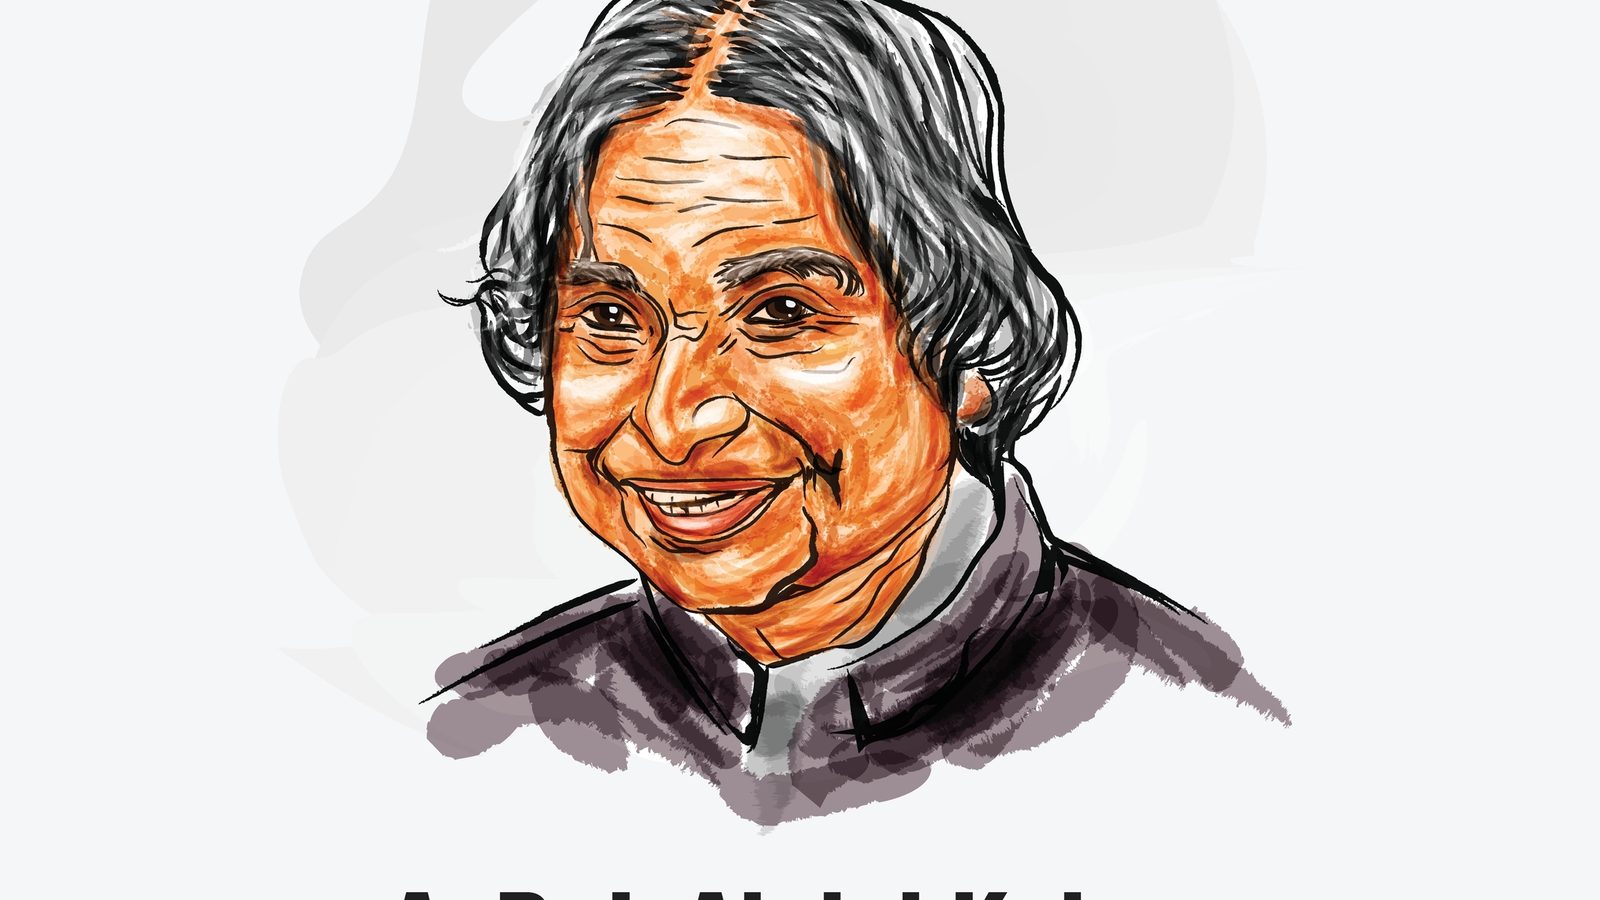 Newspaper front pages and cartoon sketches pay tribute to APJ Abdul Kalam